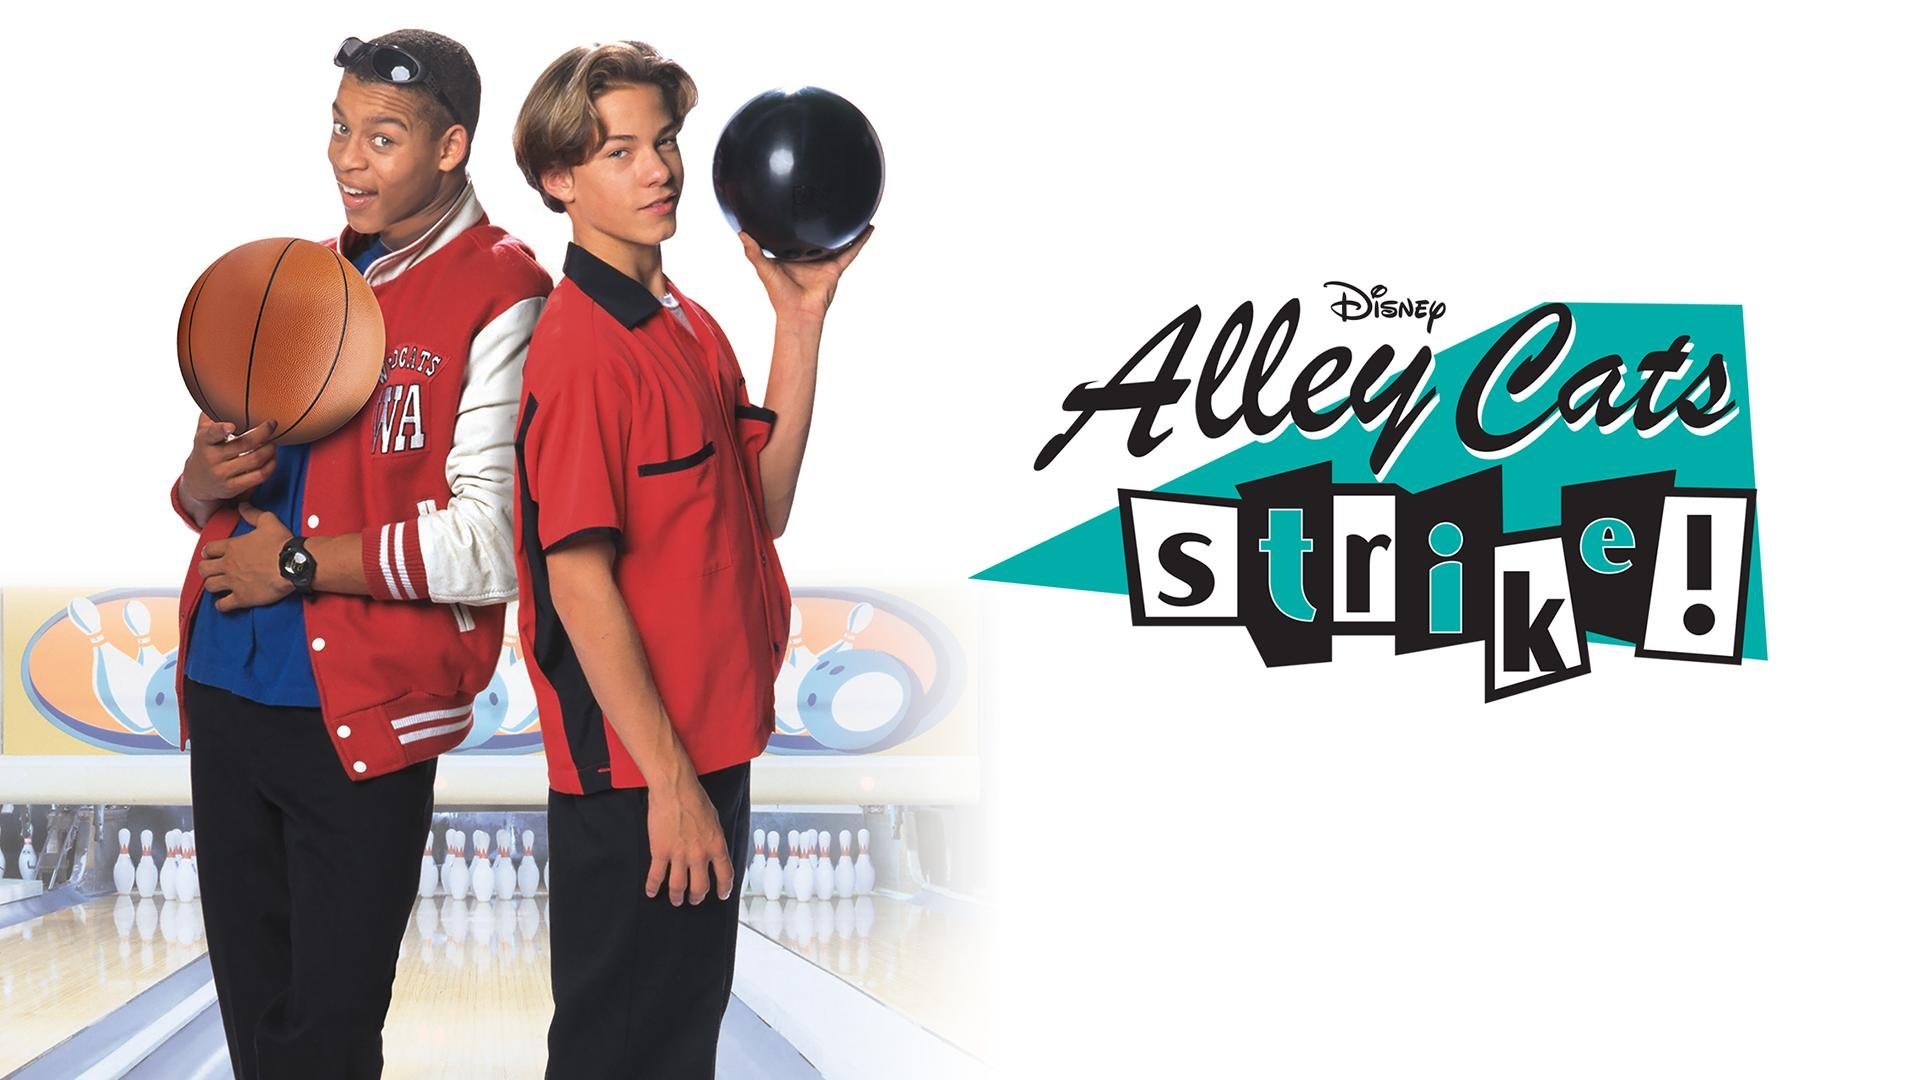 2. Alley Cats Strike (2000). 